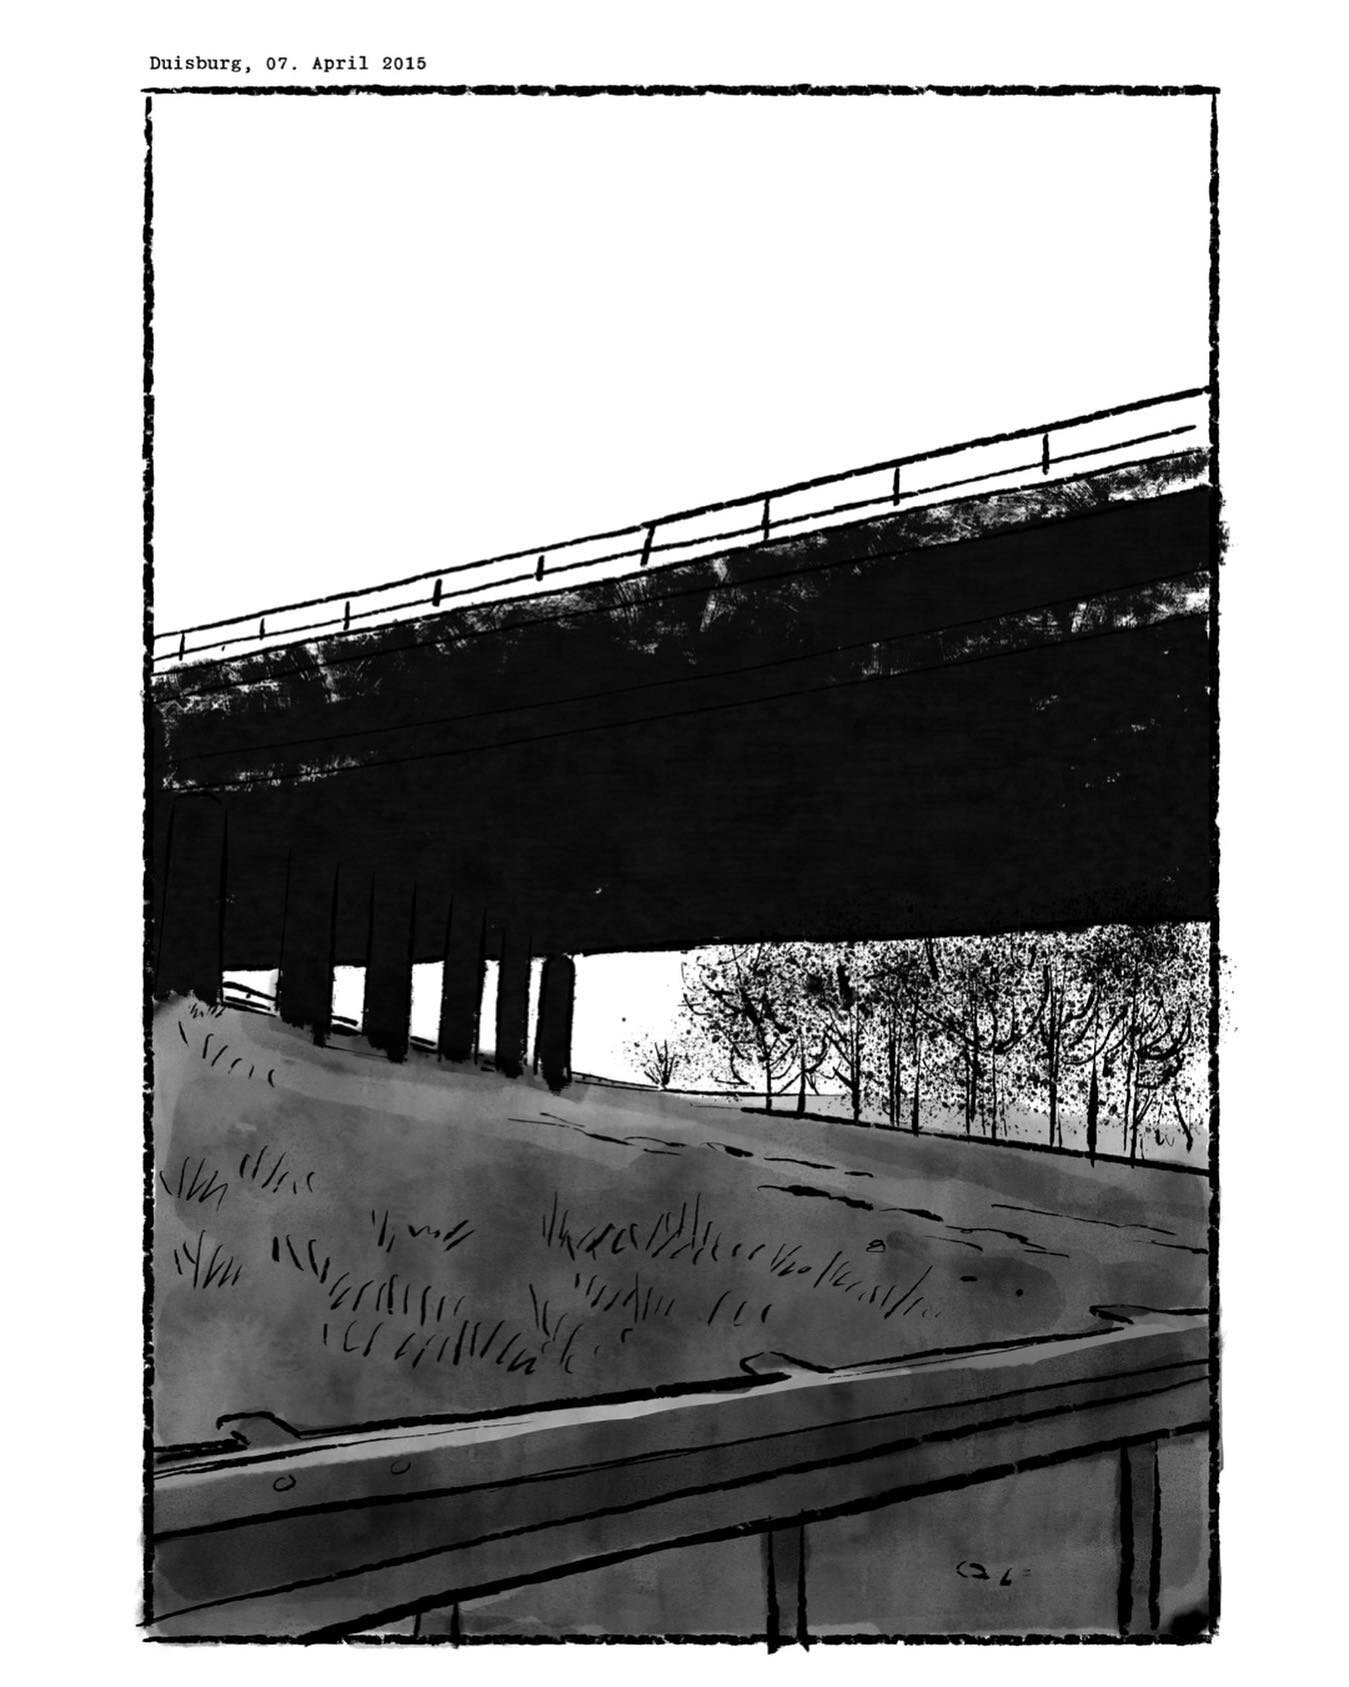 8 years now and here I am starting book two, trying to capture that sad day.
.
.
.
#graphicnovel #comic #bd #highway #dad #blackandwhite #digitalink #familyhistory #family #columbusstrasse #duisburg